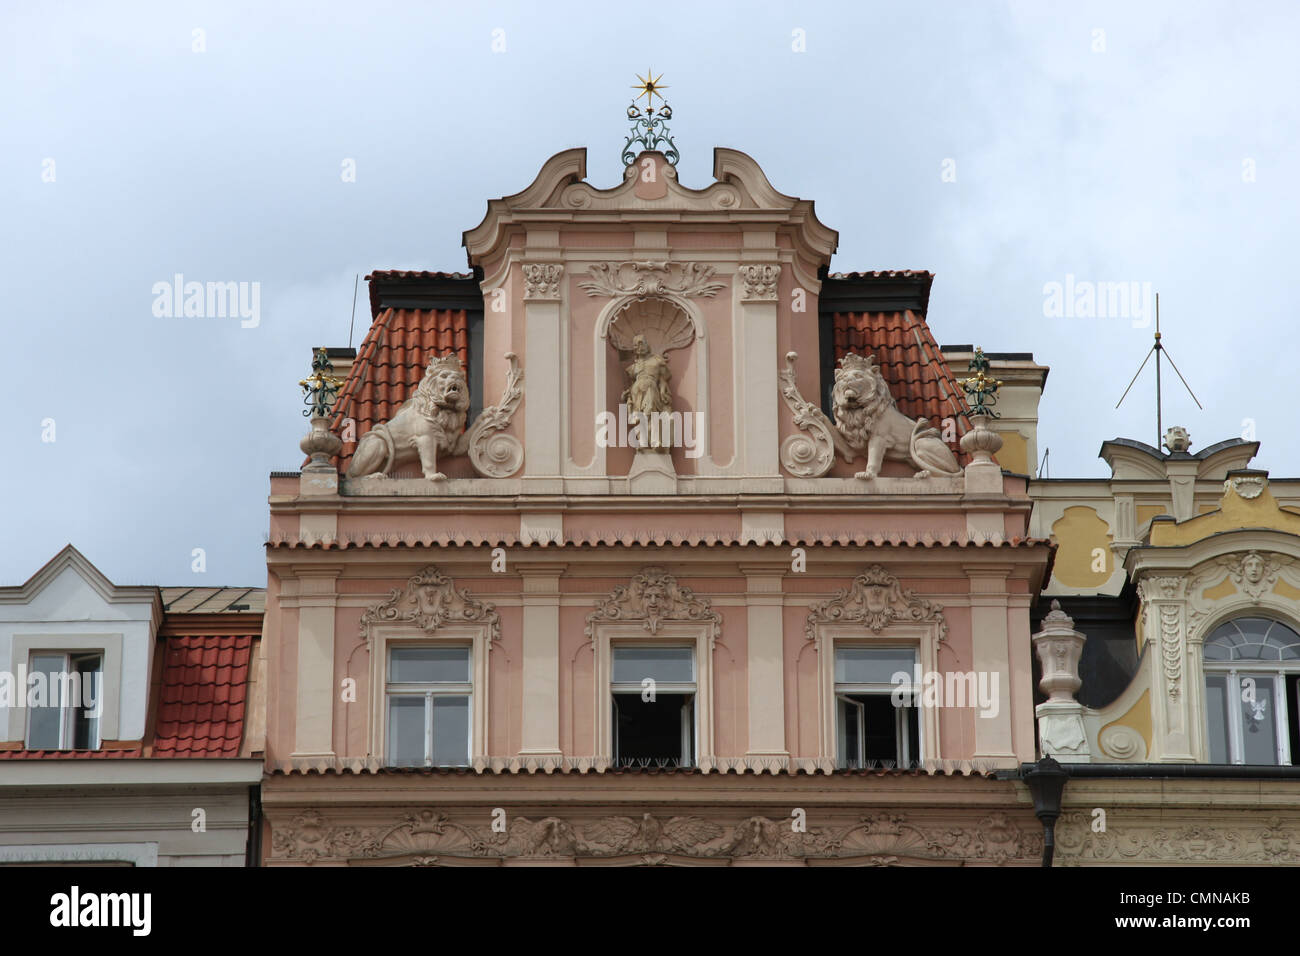 Decorative building facades in Prague's Old Town Square Stock Photo